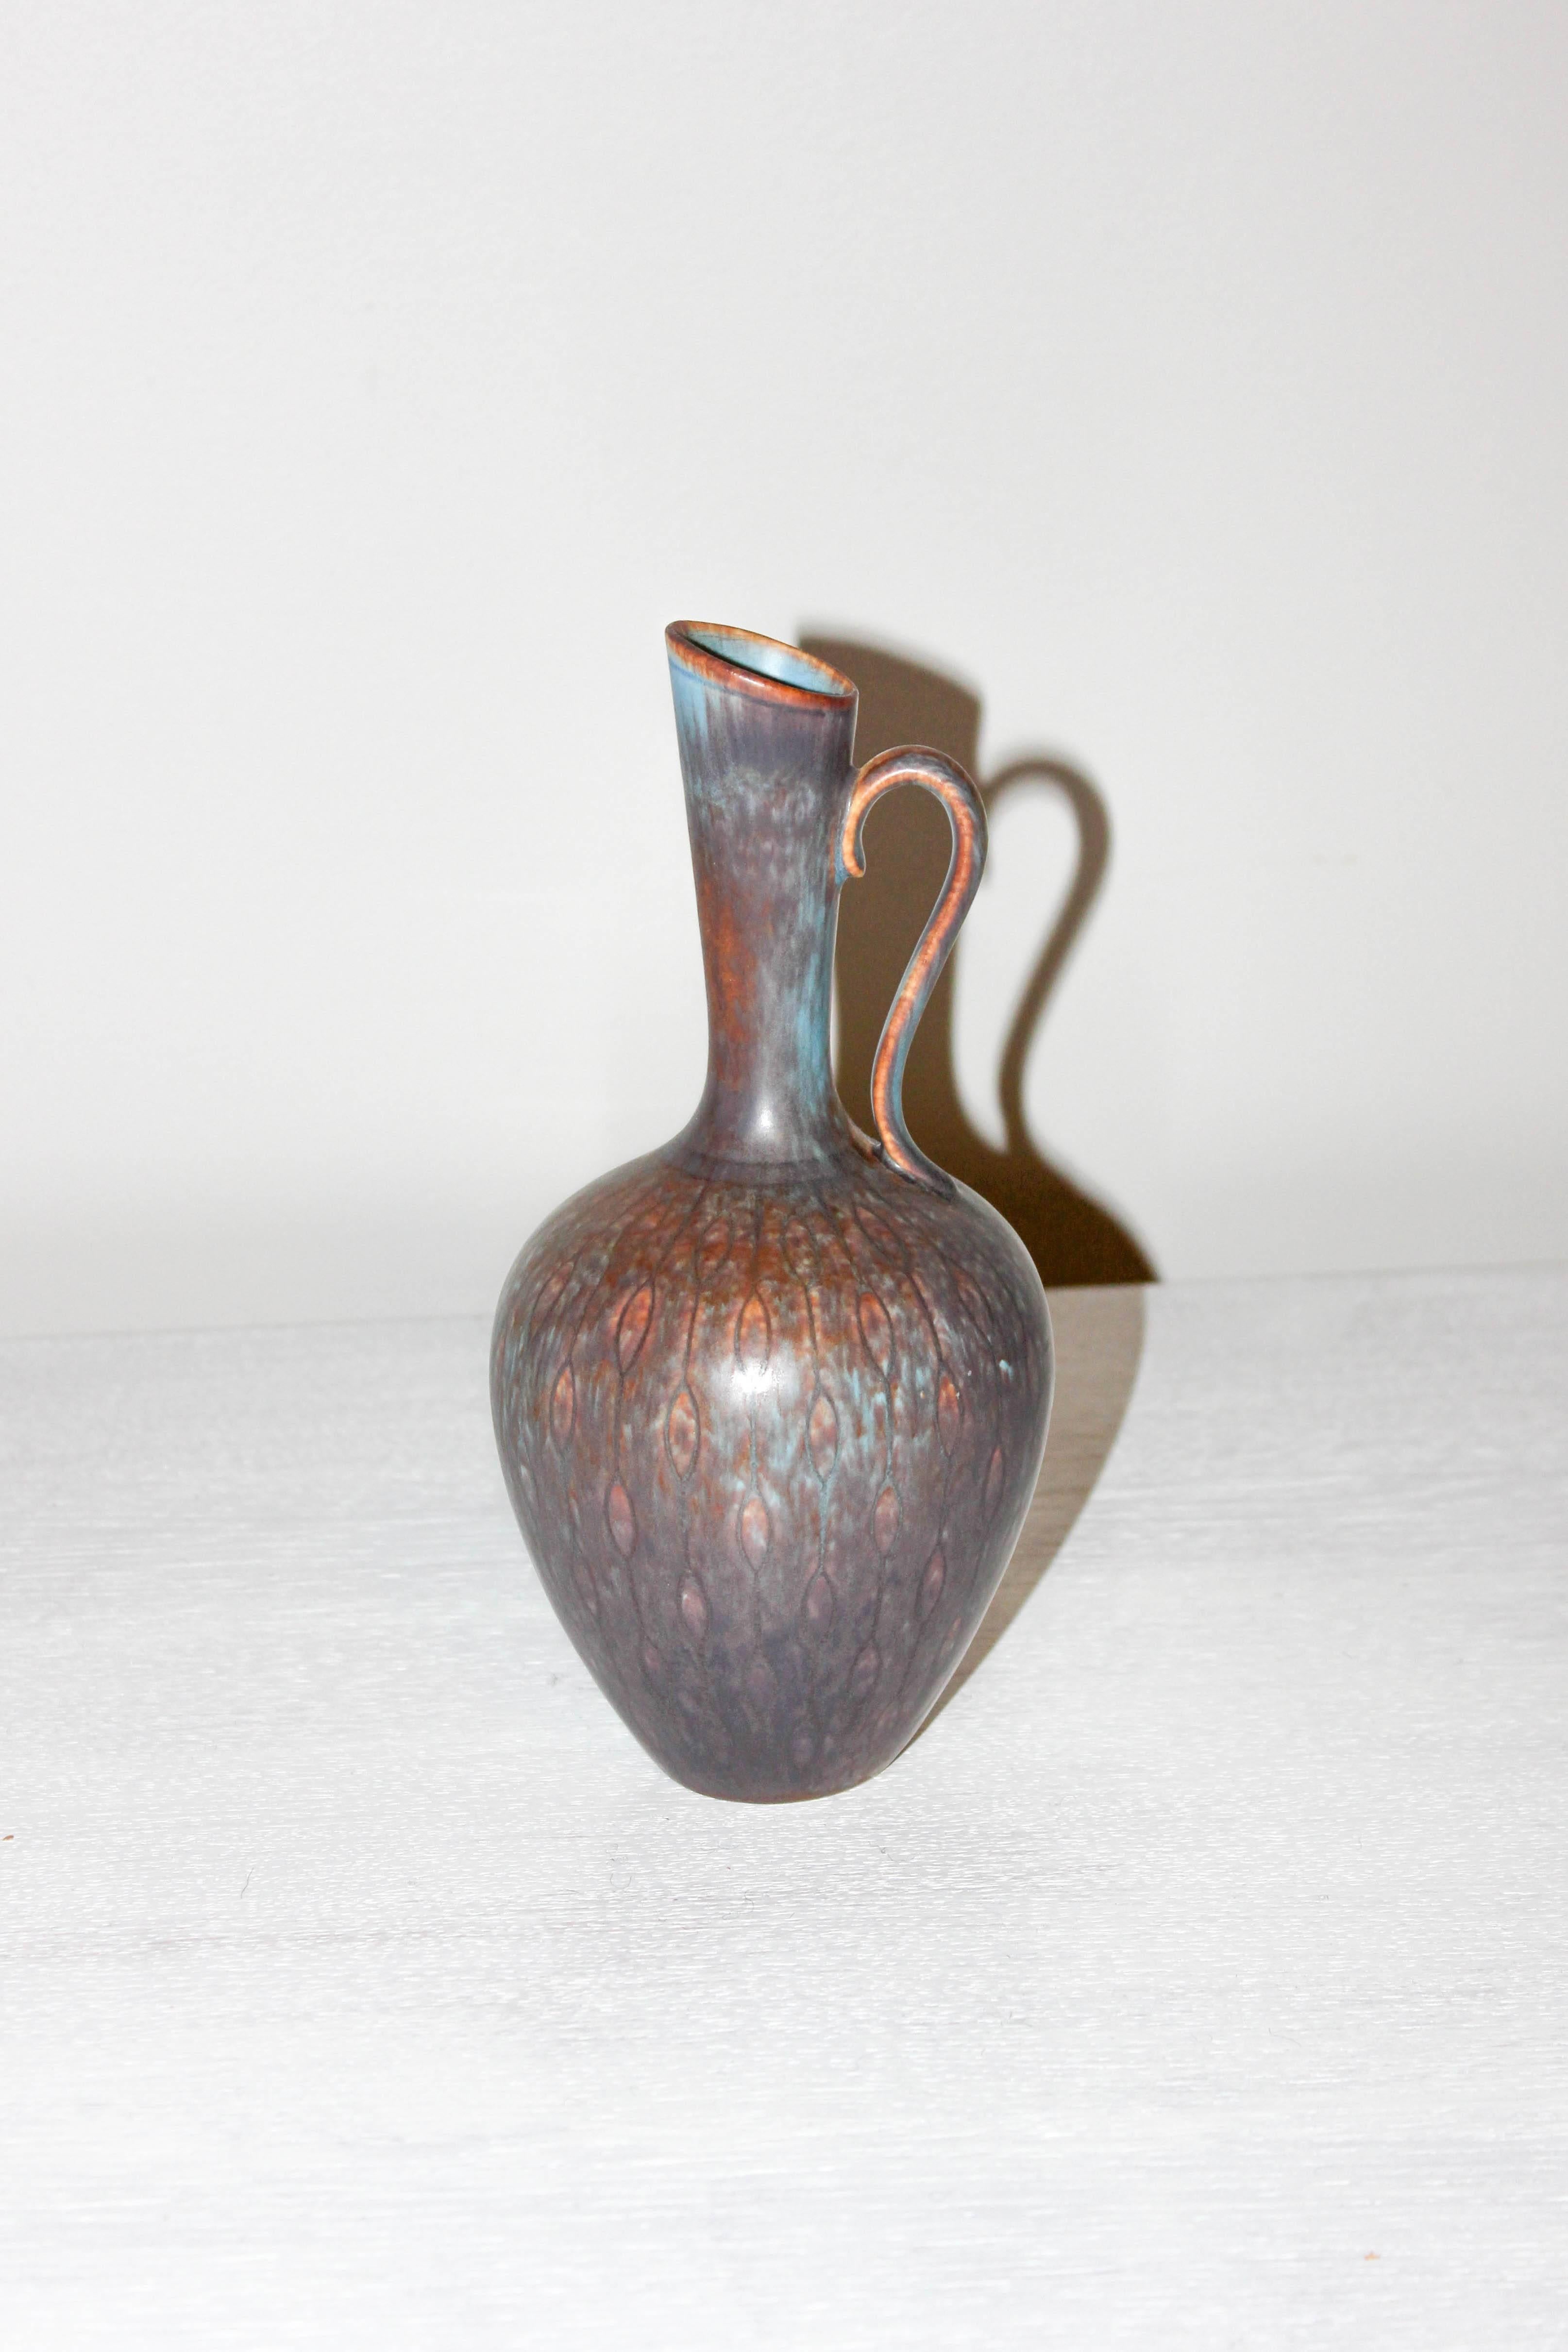 Very decorative midcentury ceramic vase by Swedish designer Gunnar Nylund for Rörstrand. The vase is in very good vintage condition.